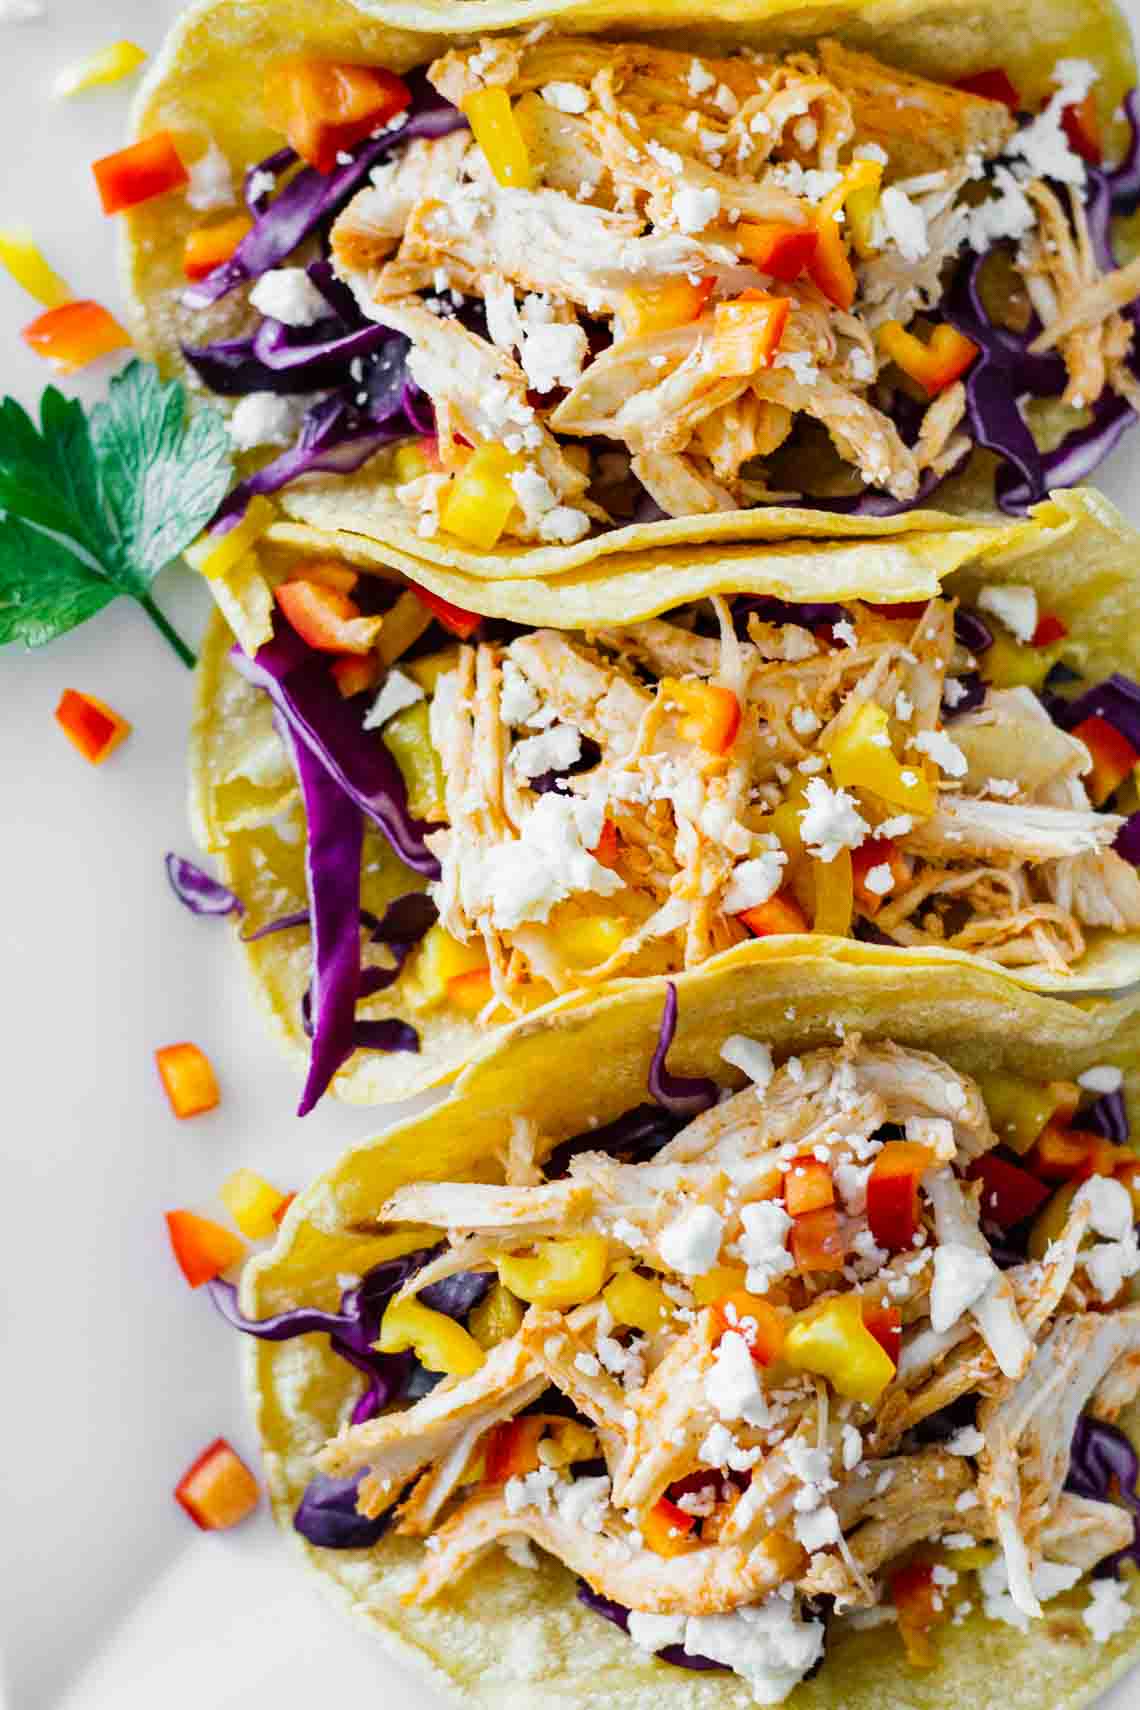 Healthy Sriracha Shredded Chicken Tacos on a white plate